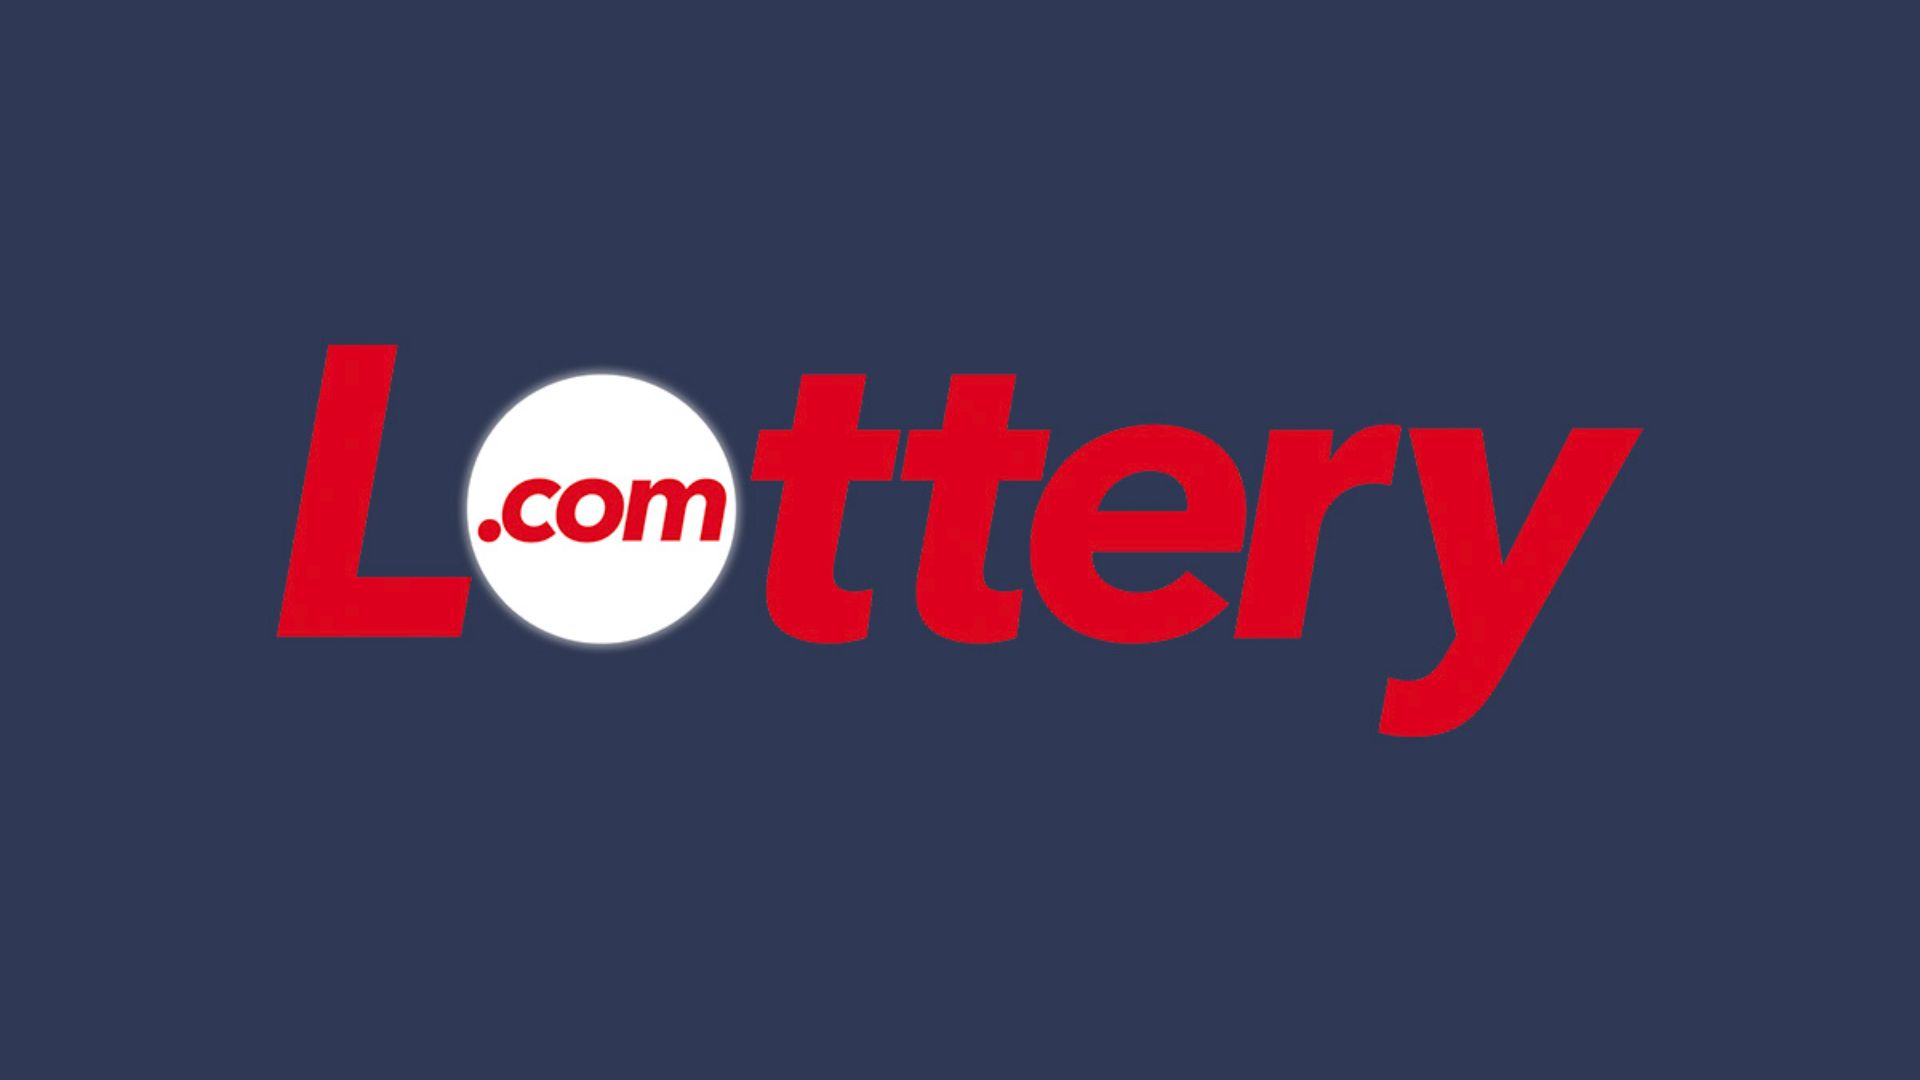 SportLocker Acquired By Lottery.com, Inc.